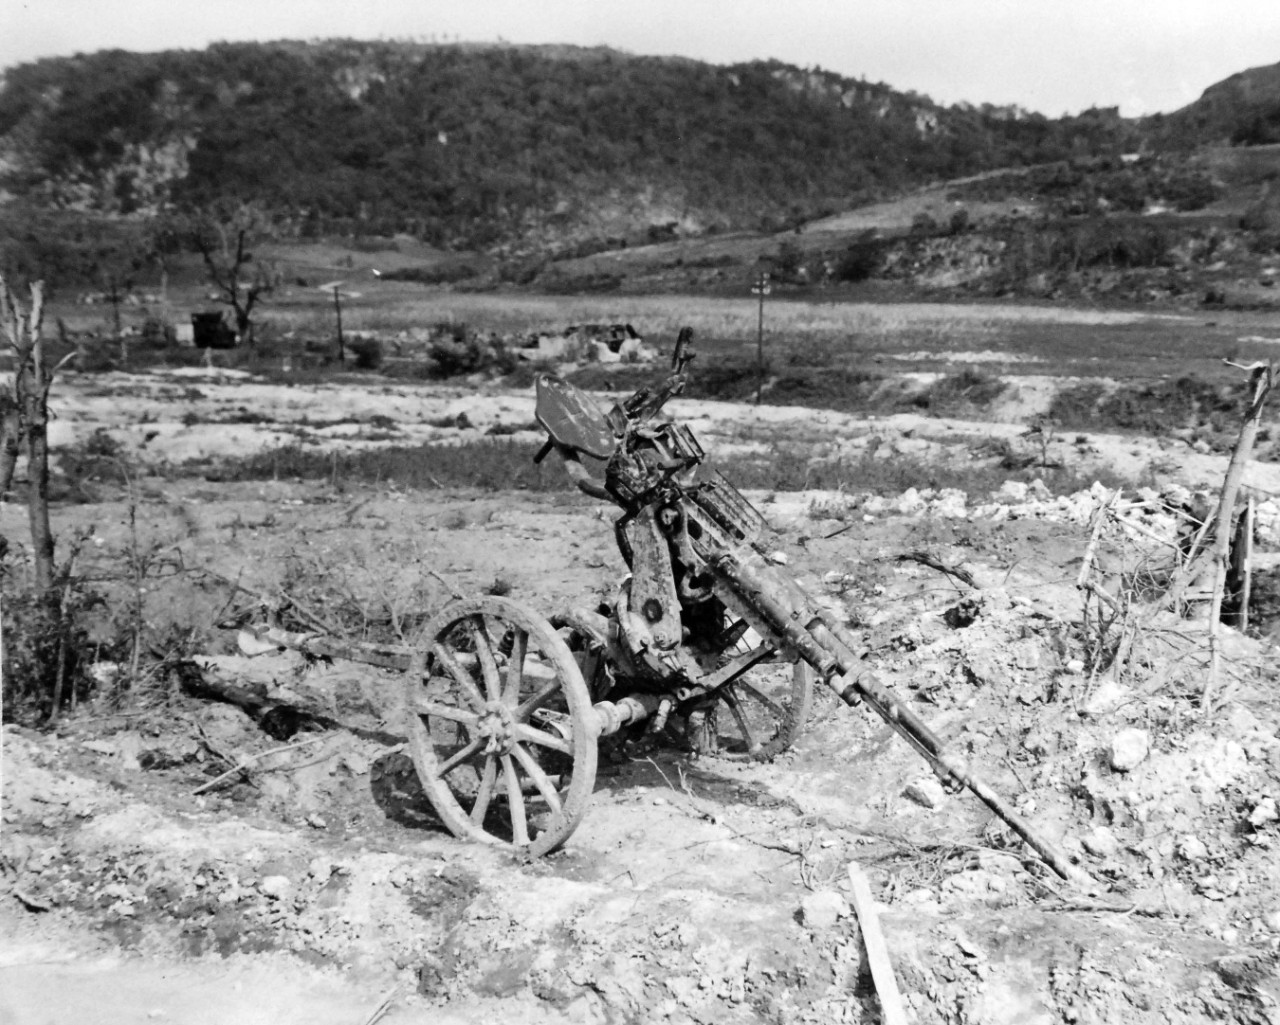 80-G-307848:  Invasion of Saipan, June-July 1944.  Japanese guns captured on Saipan after U.S. Invasion.   Shown:  50 cal. Photograph received March 20, 1945.      Official U.S. Navy Photograph, now in the collections of the U.S. Navy.  (2017/04/11).  